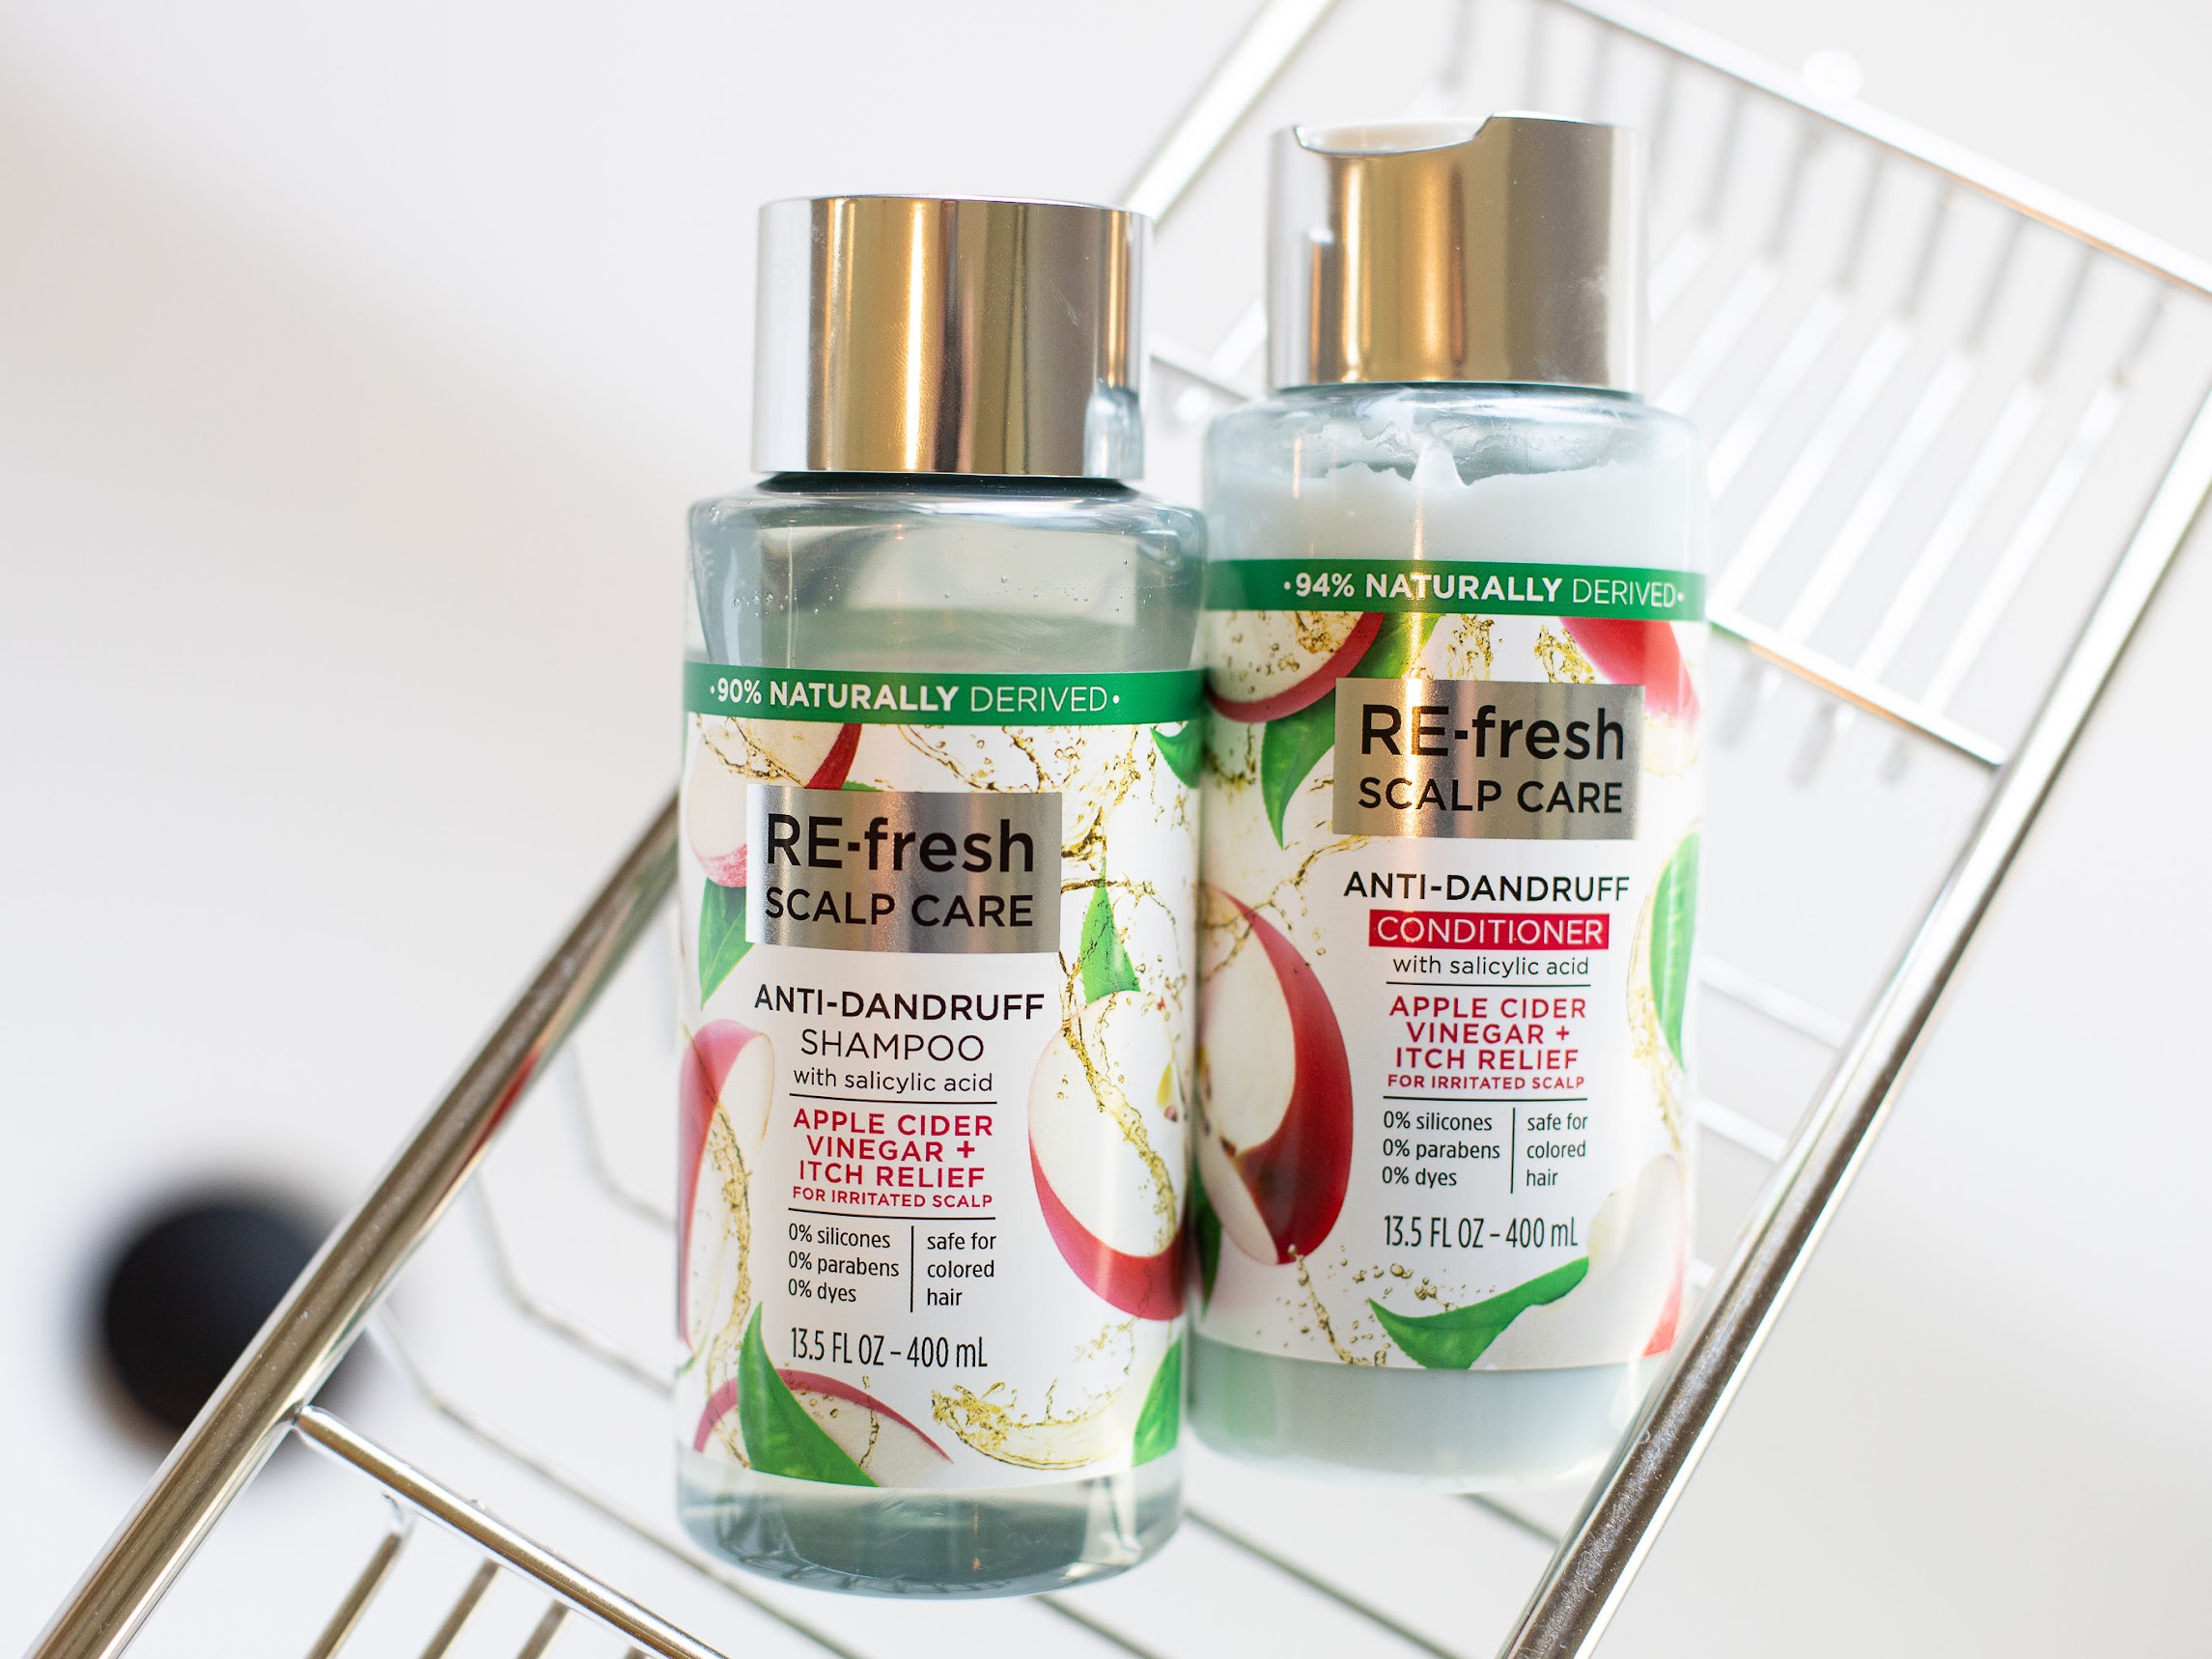 Re-fresh Shampoo or Conditioner As Low AS $2.99 At Publix on I Heart Publix